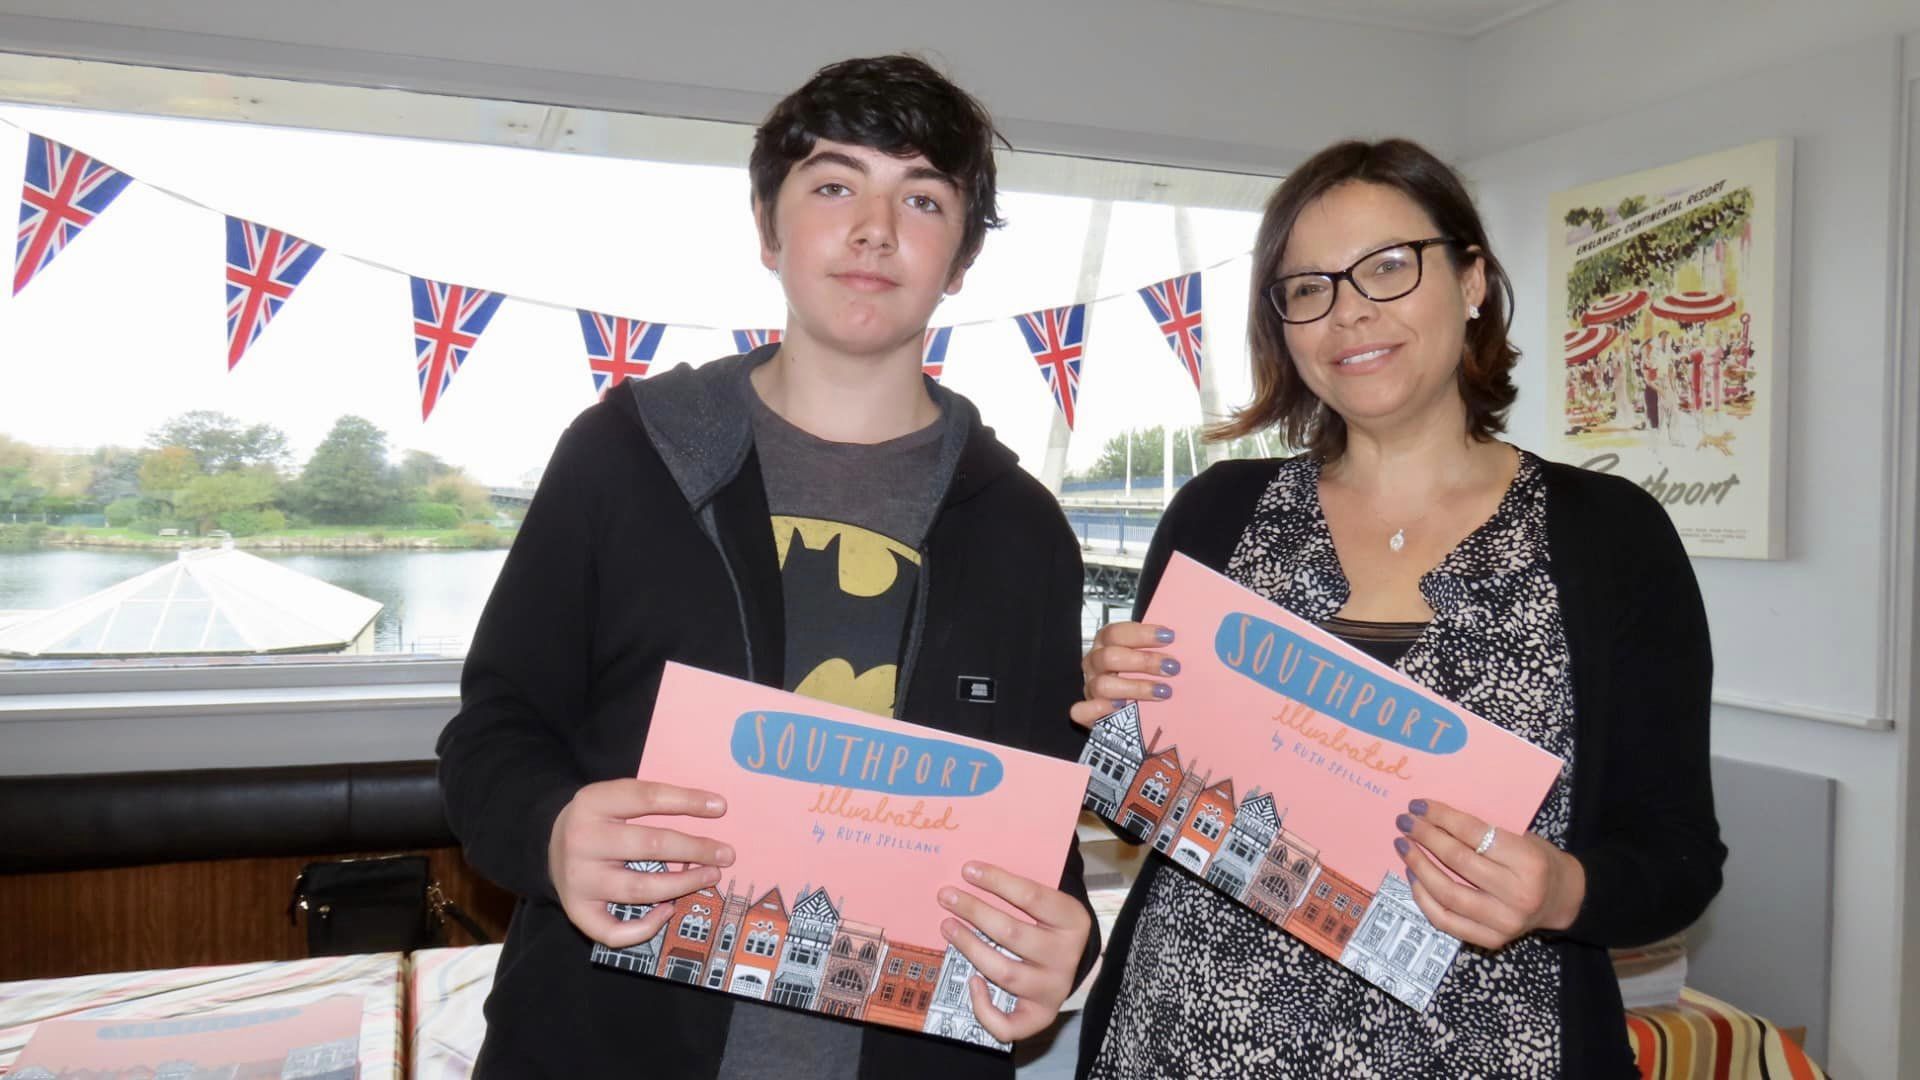 Ruth Spillane has held a book launch for 'Southport Illustrated' at Silcock's Pier Family Restaurant in Southport. Ruth is pictured with son, Rowan. Photo by Andrew Brown Stand Up For Southport